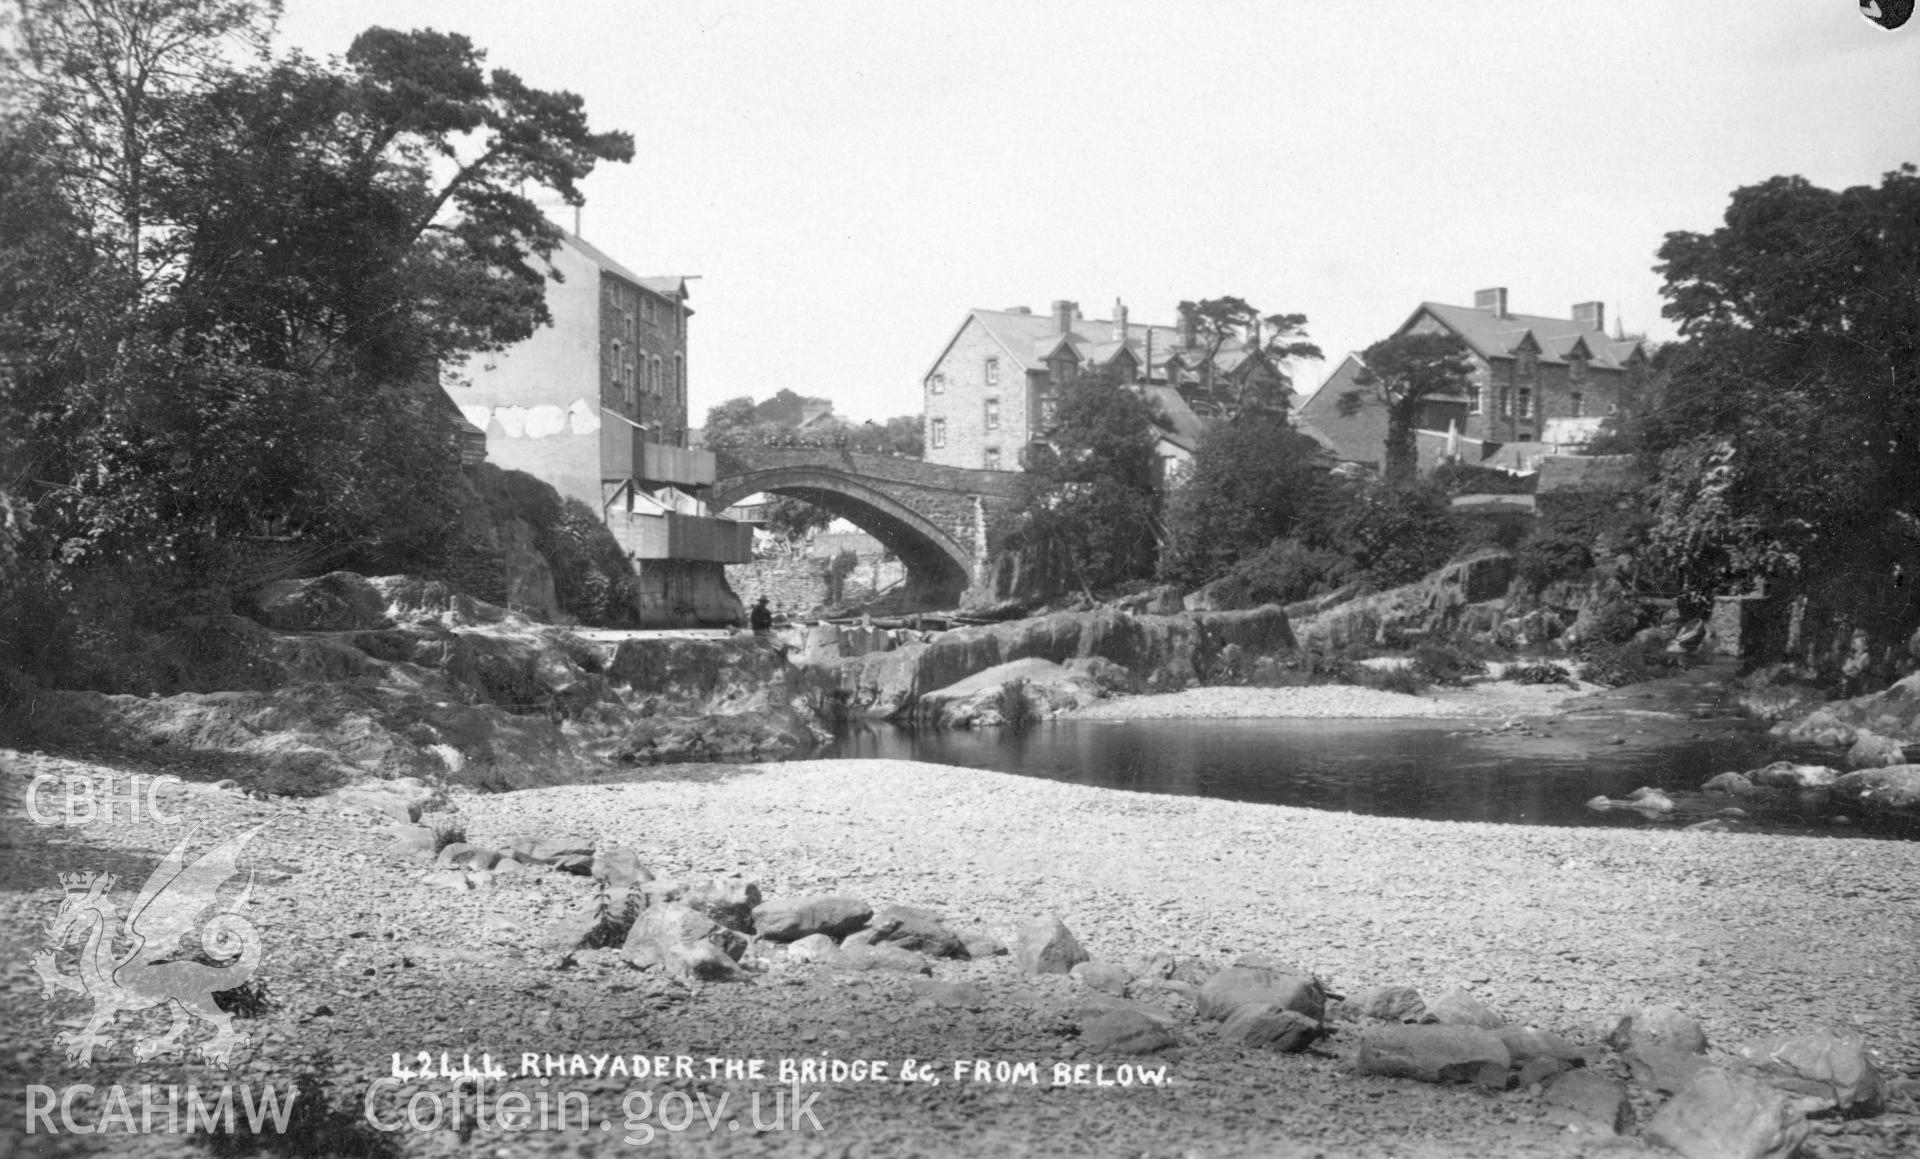 Original postcard showing Rhayader Bridge and nearby buildings - image taken from the river bank.